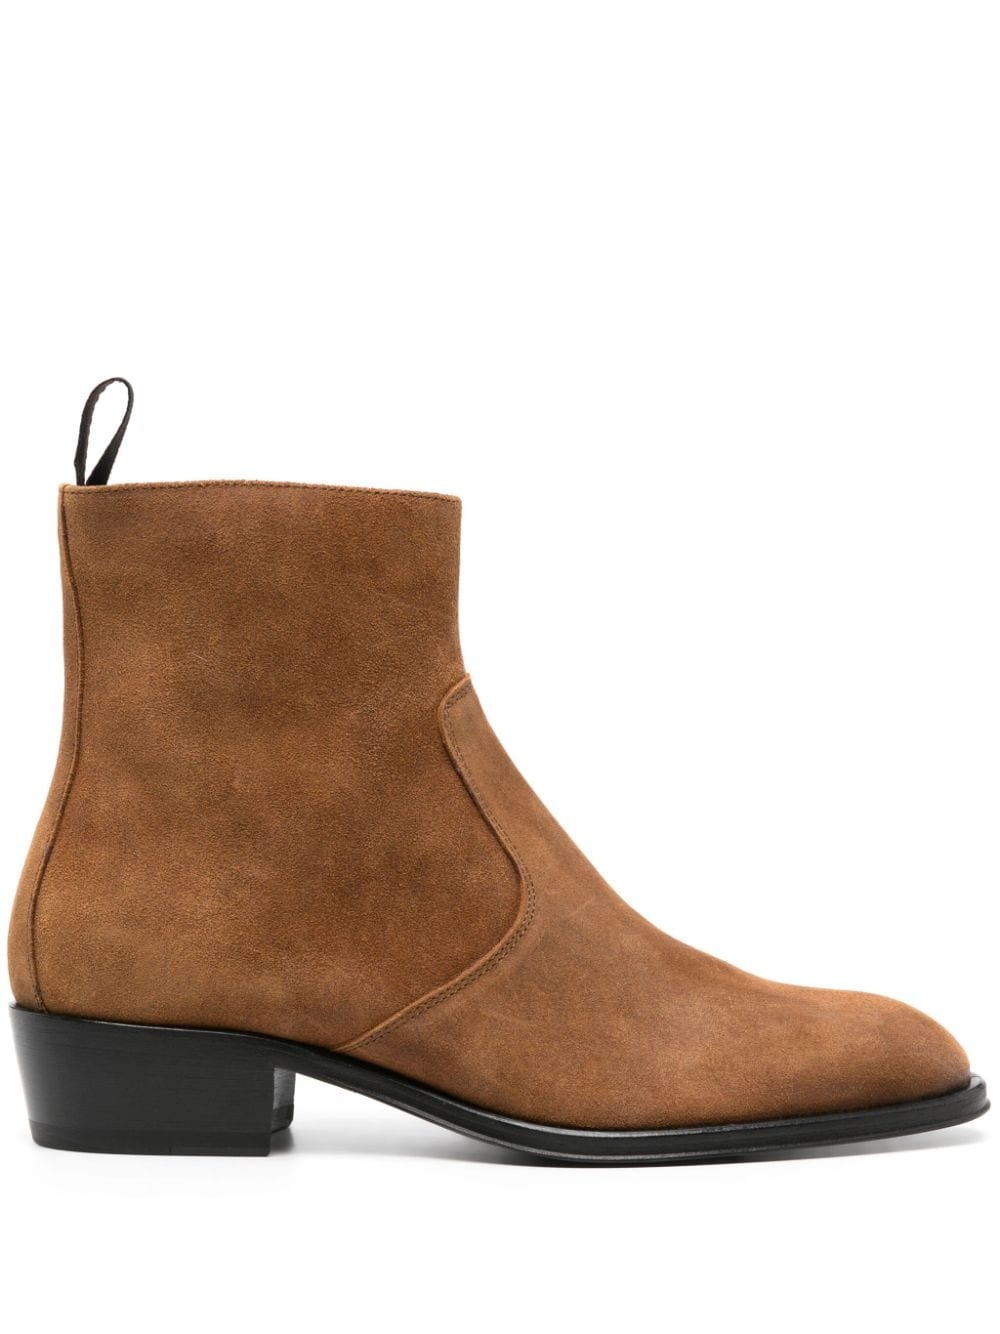 40mm suede ankle boots - 1